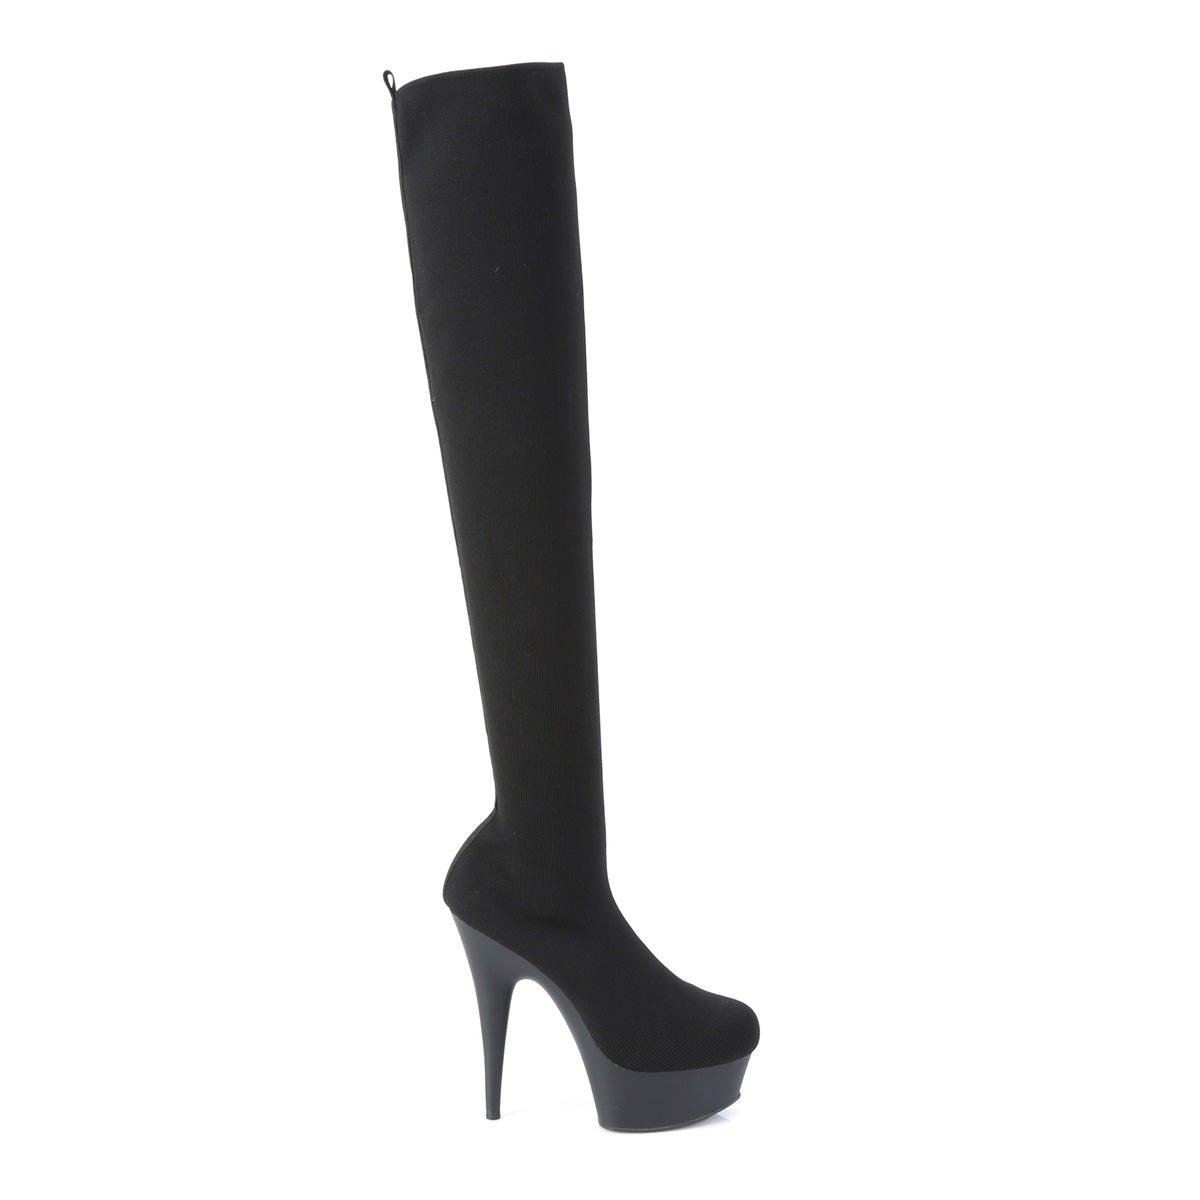 DELIGHT-3002-1 Pleaser 6" Heel Black Stretch Strippers Shoes-Pleaser- Sexy Shoes Fetish Heels